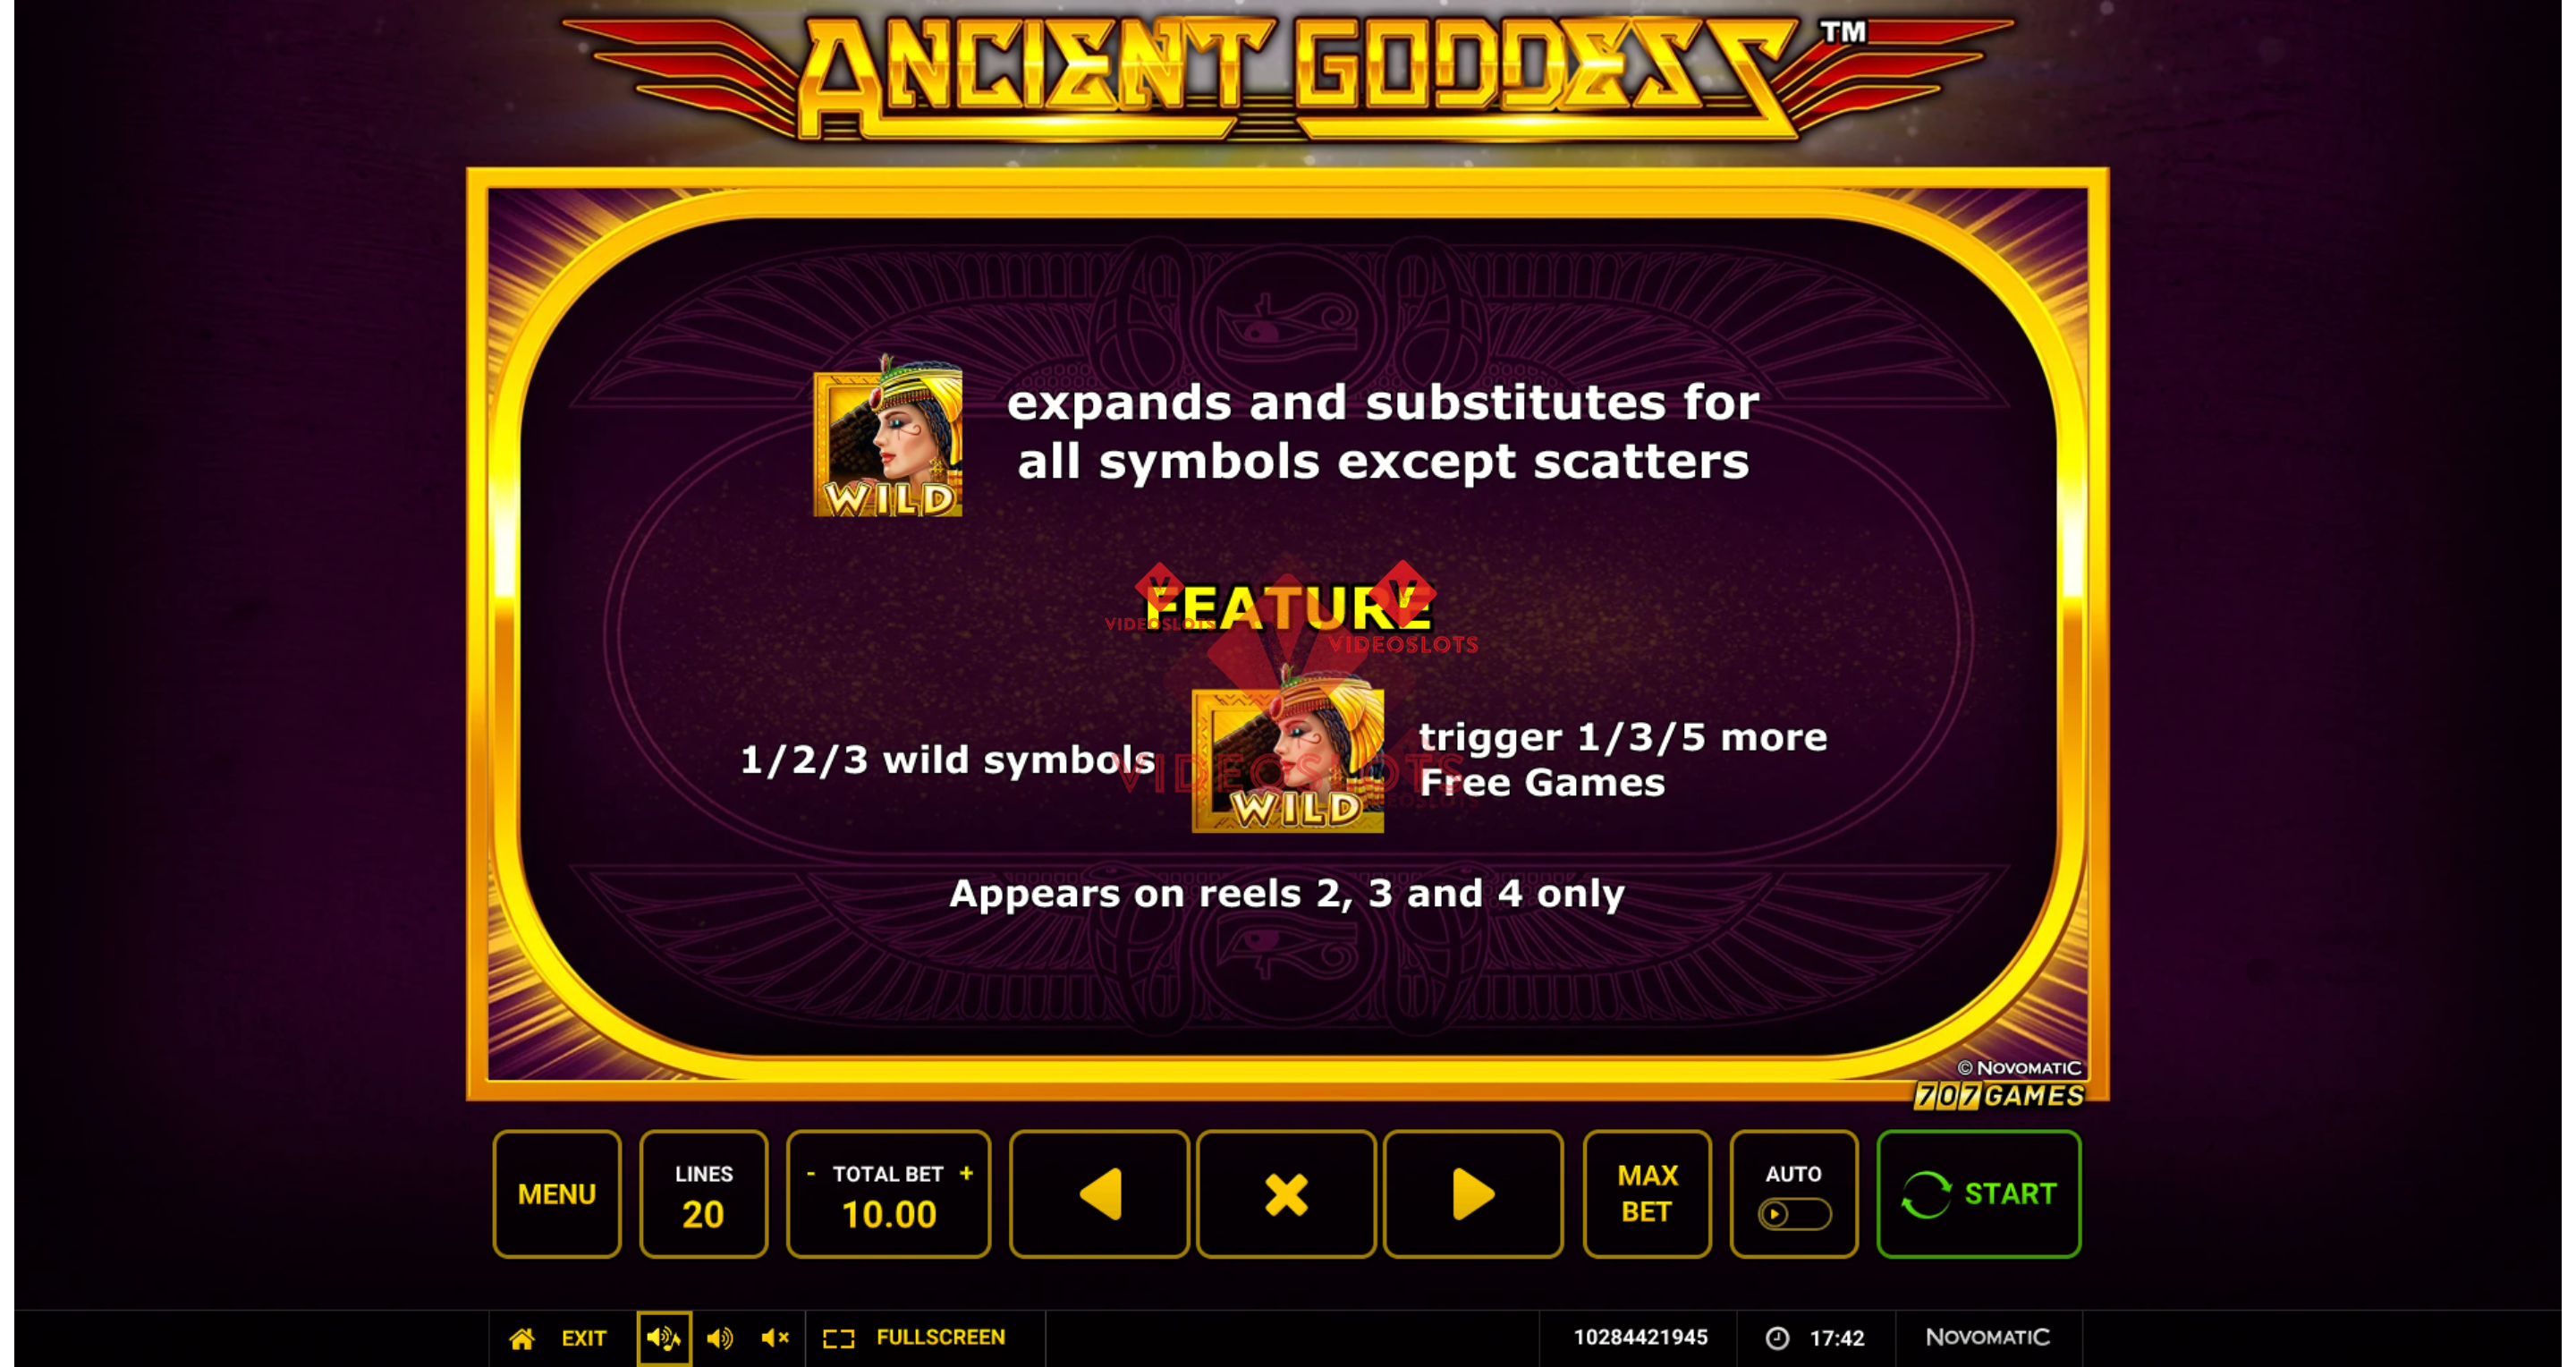 Pay Table for Ancient Goddess slot from Greentube